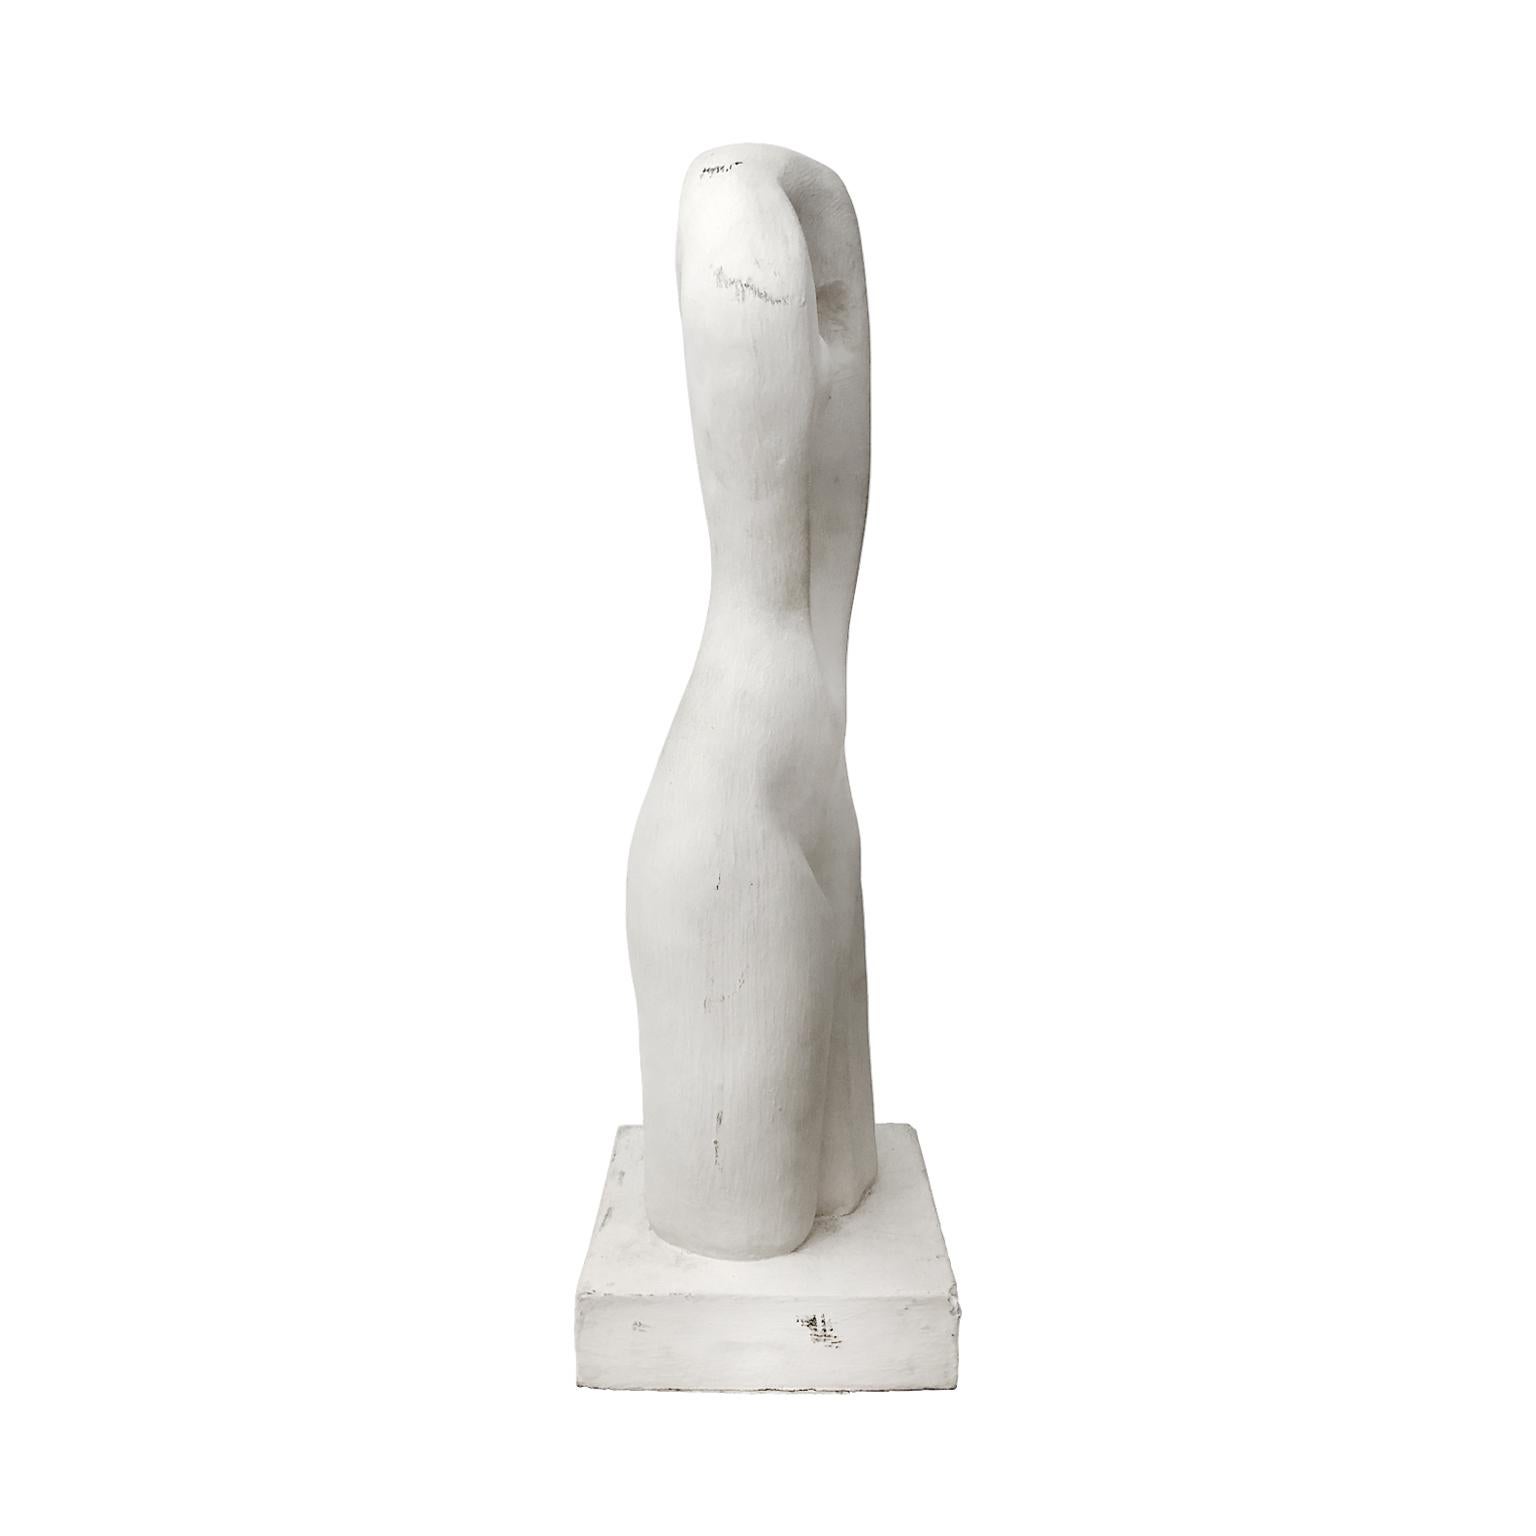 American 1970s Abstract Plaster Female Torso Sculpture